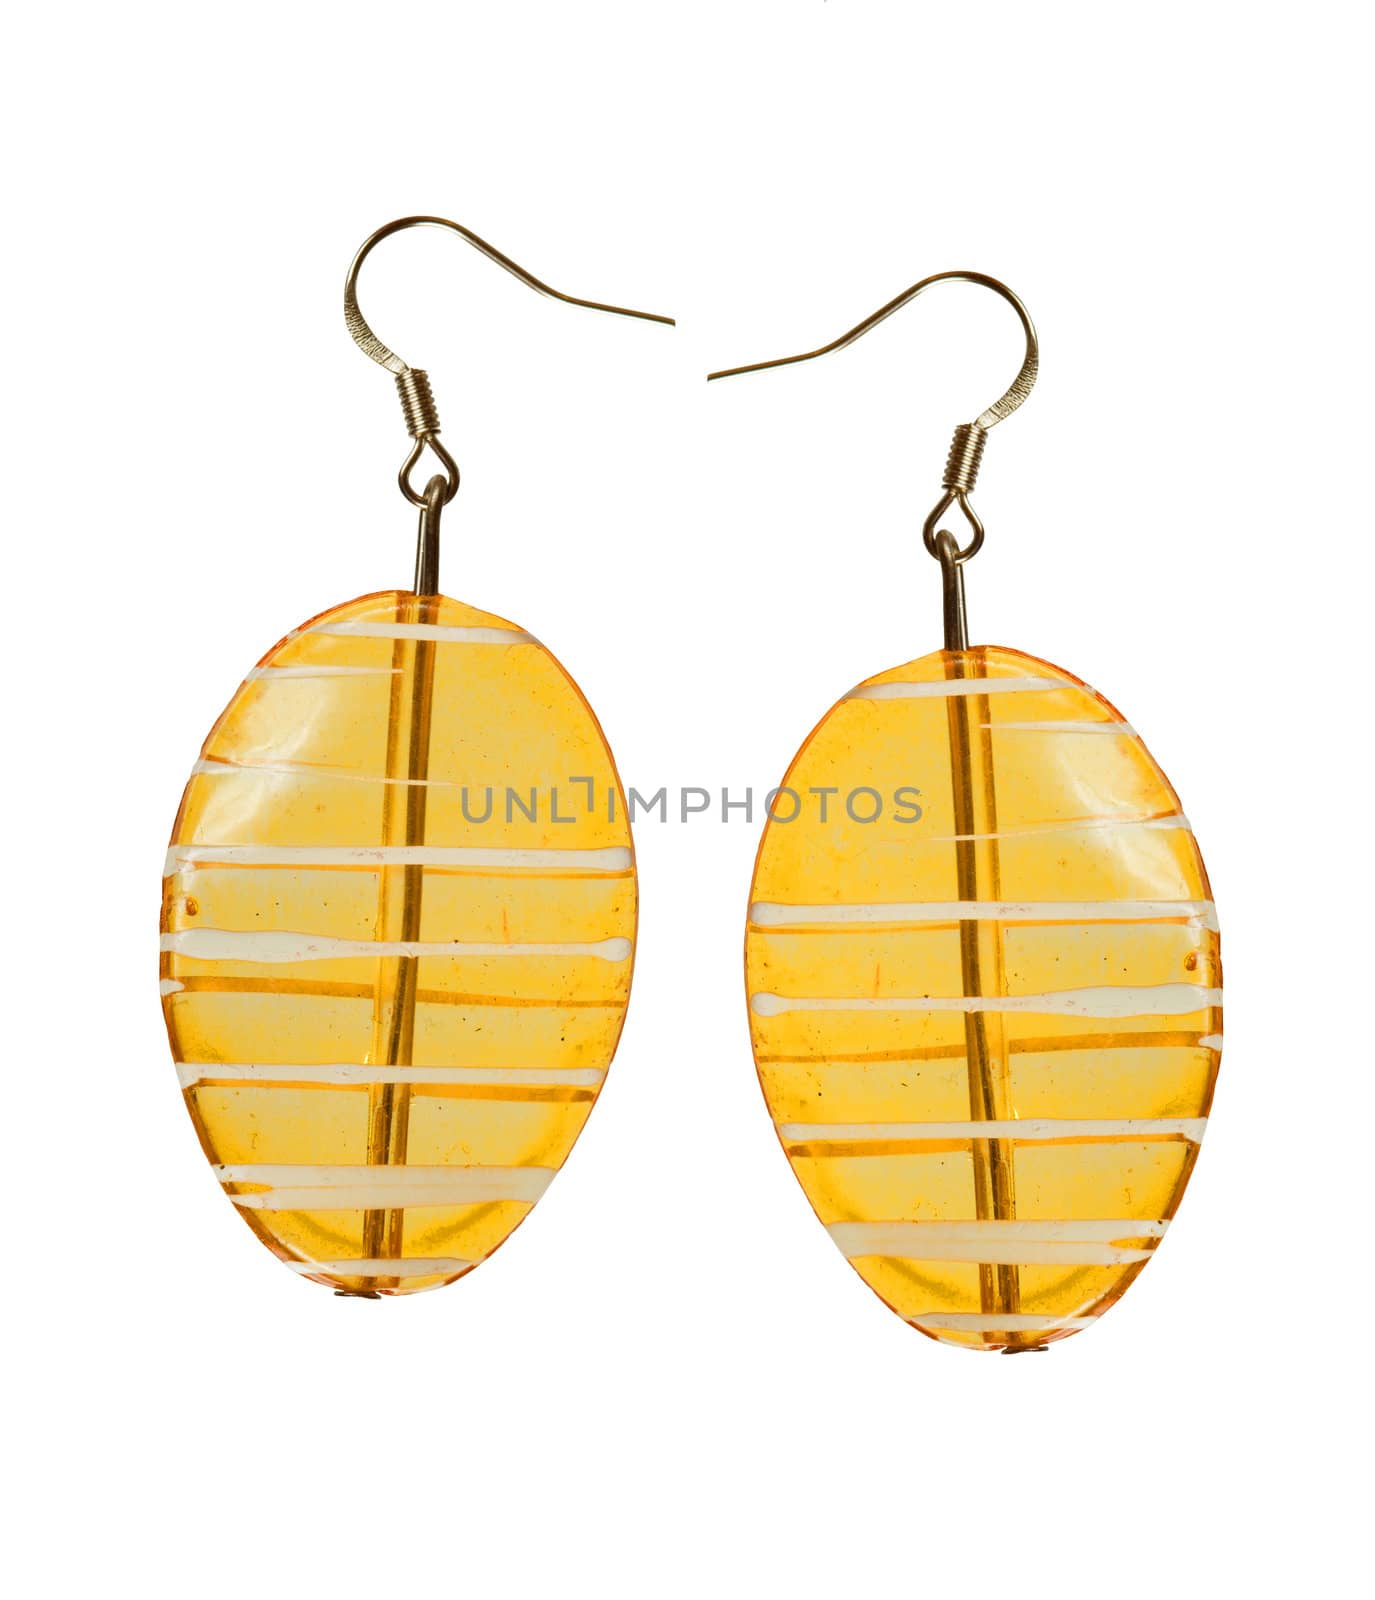 Earrings in yellow glass on a white background. Collage